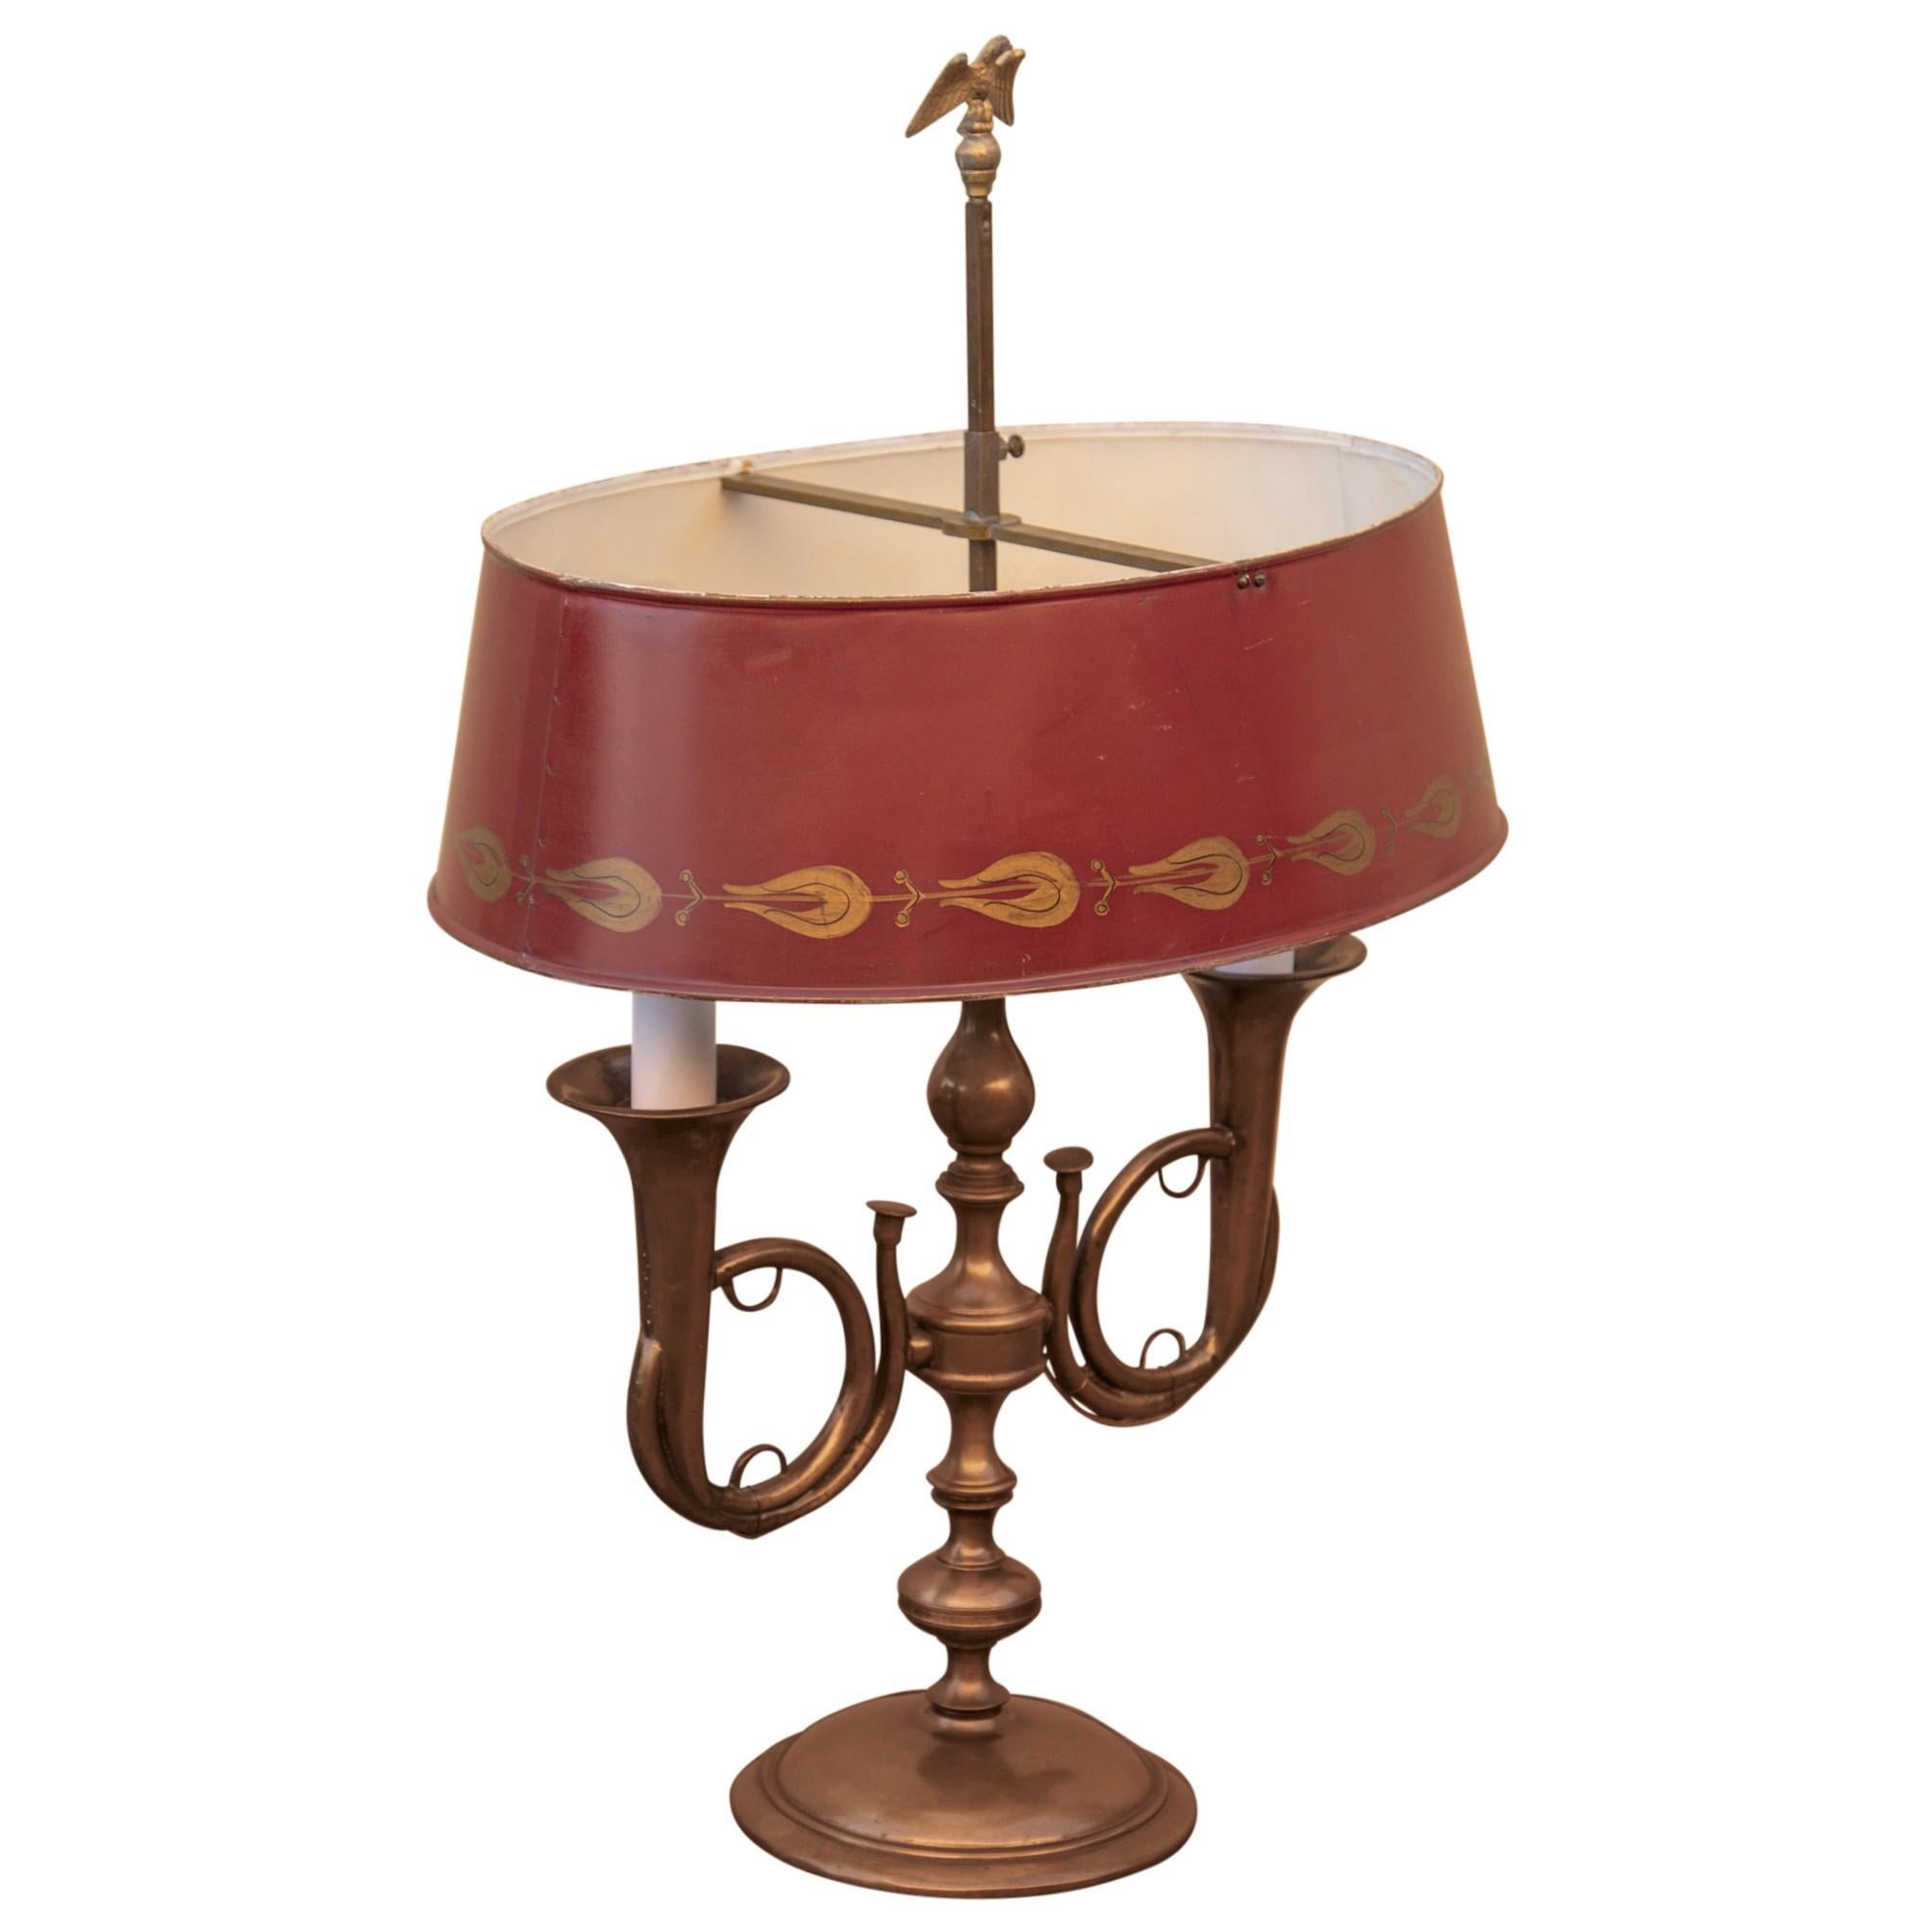 20th Century French Empire Bronze and Red Tole Bouillotte Table Lamp